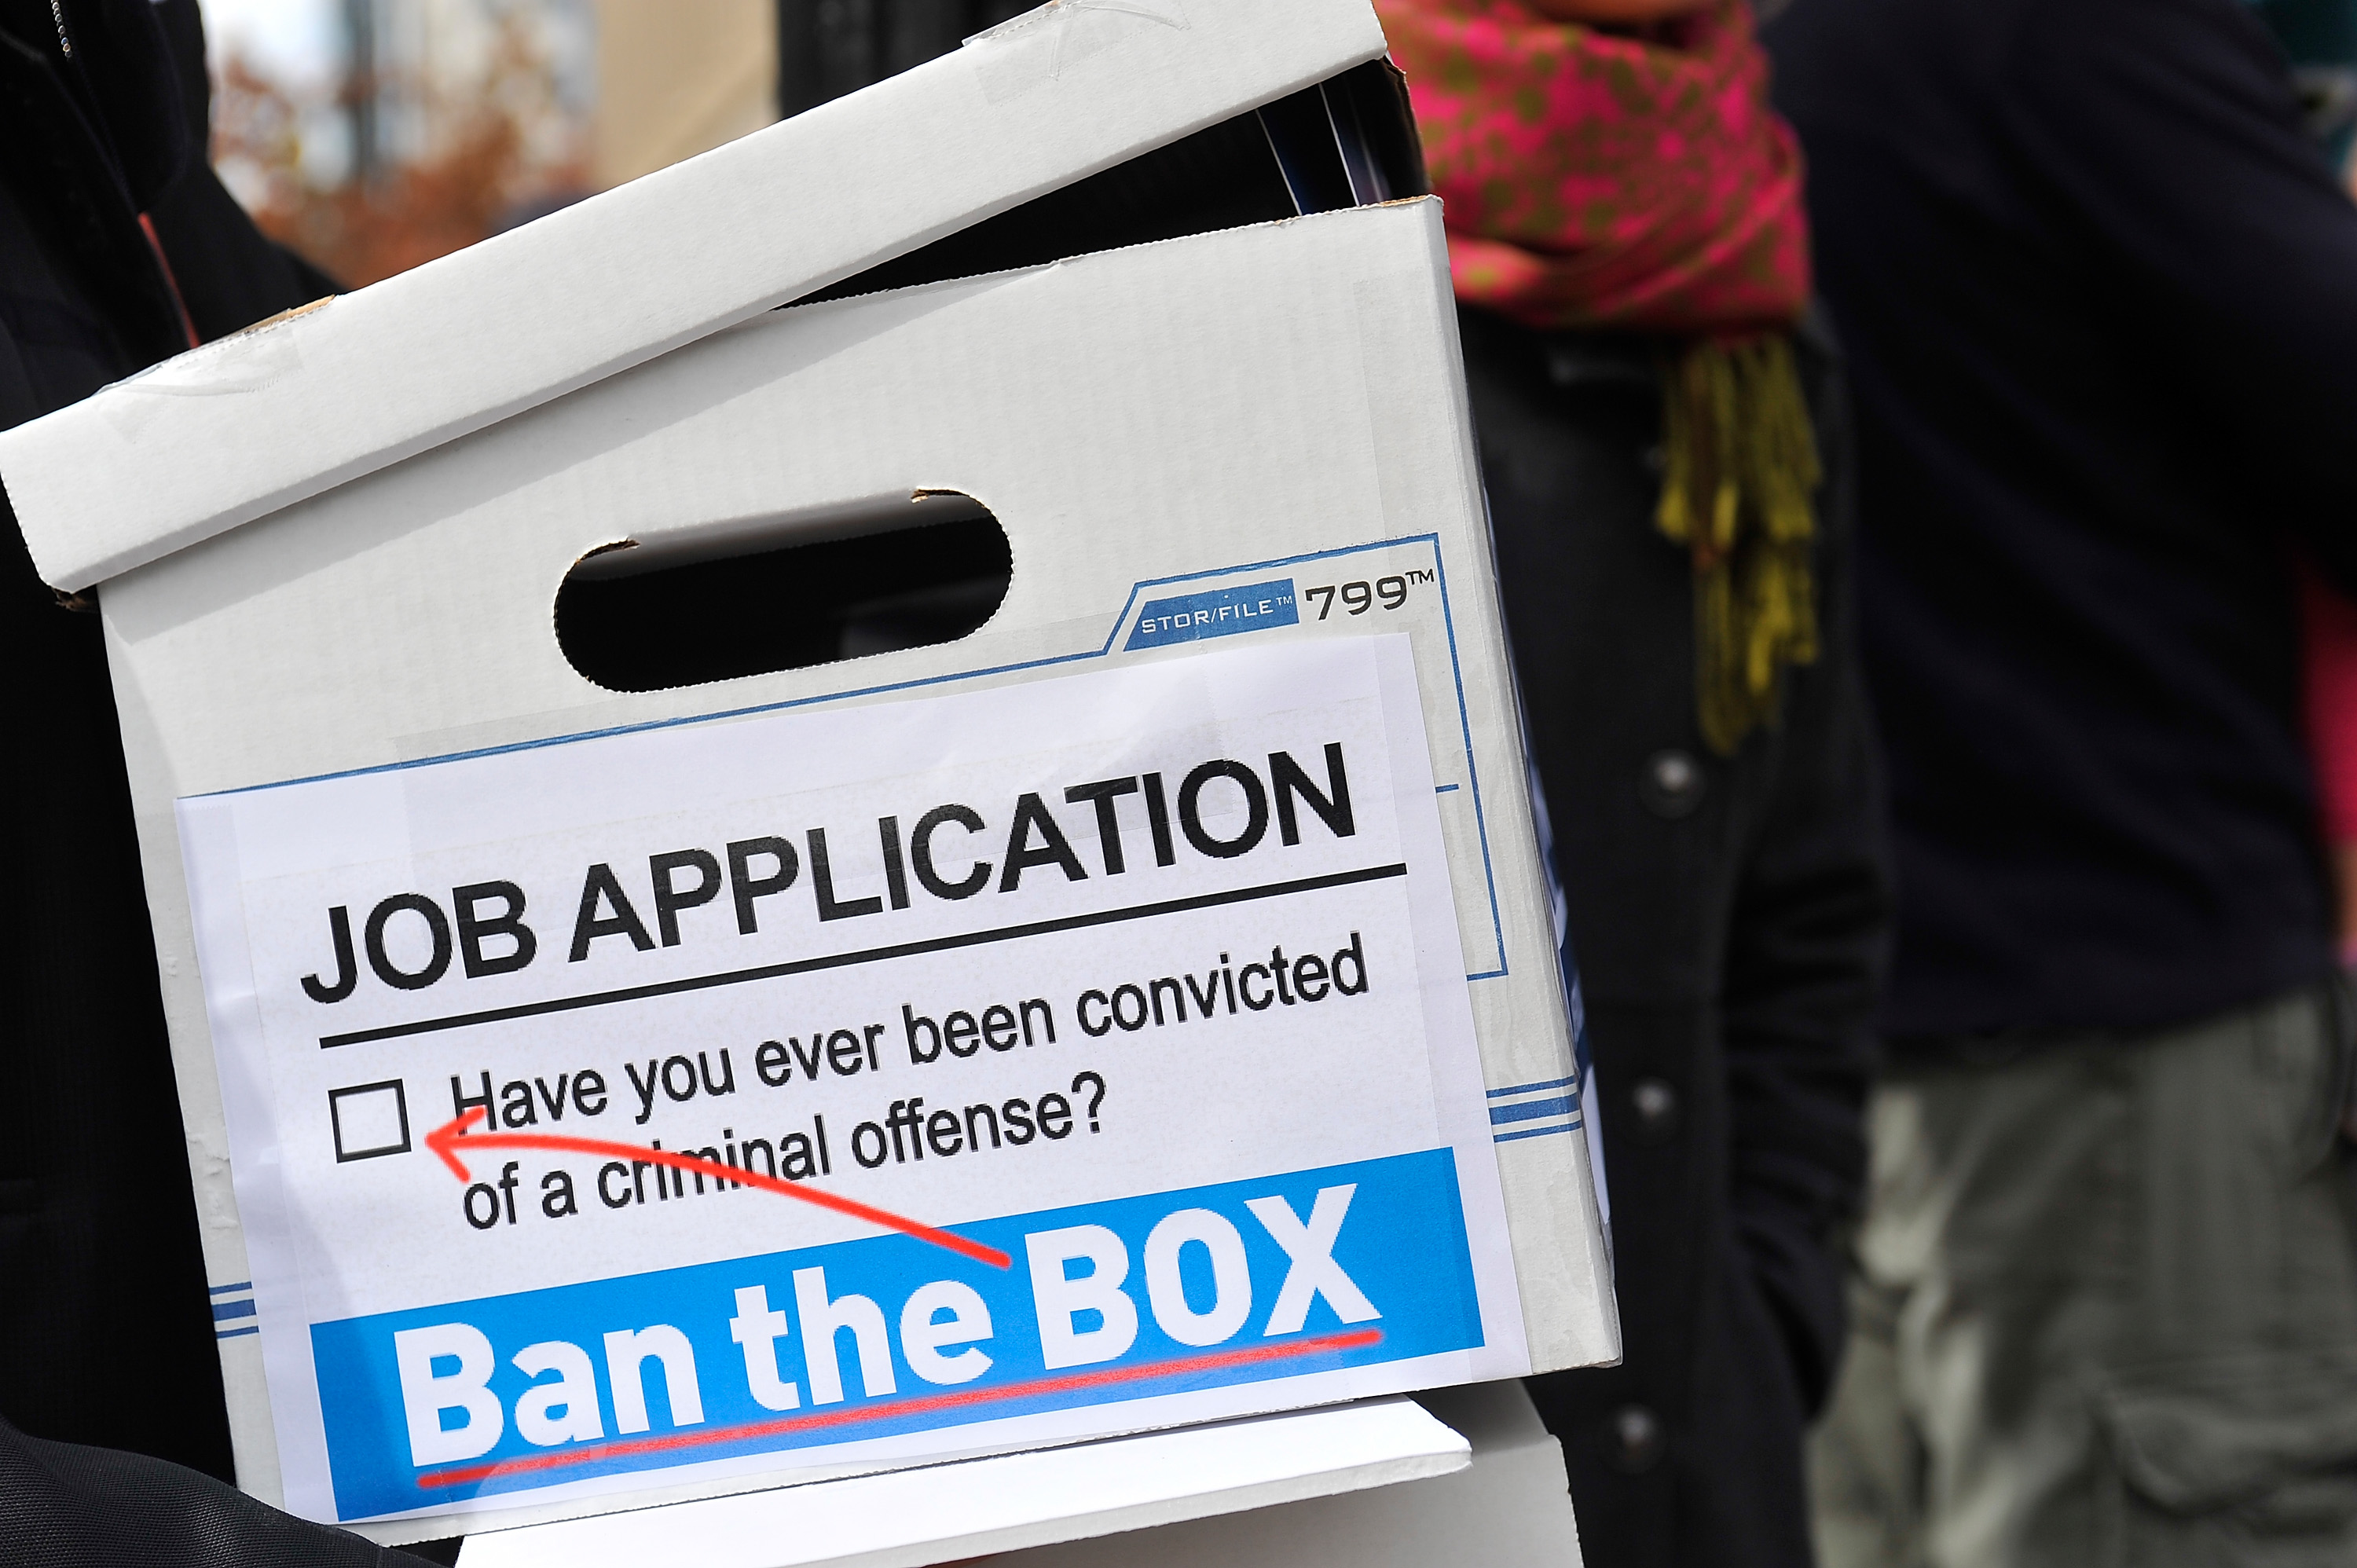 Outreach materials at a press conference for the Ban The Box Petition Delivery to The White House in Washington, D.C., on Oct. 26, 2015. (Larry French—ColorOfChange.org/Getty Images)